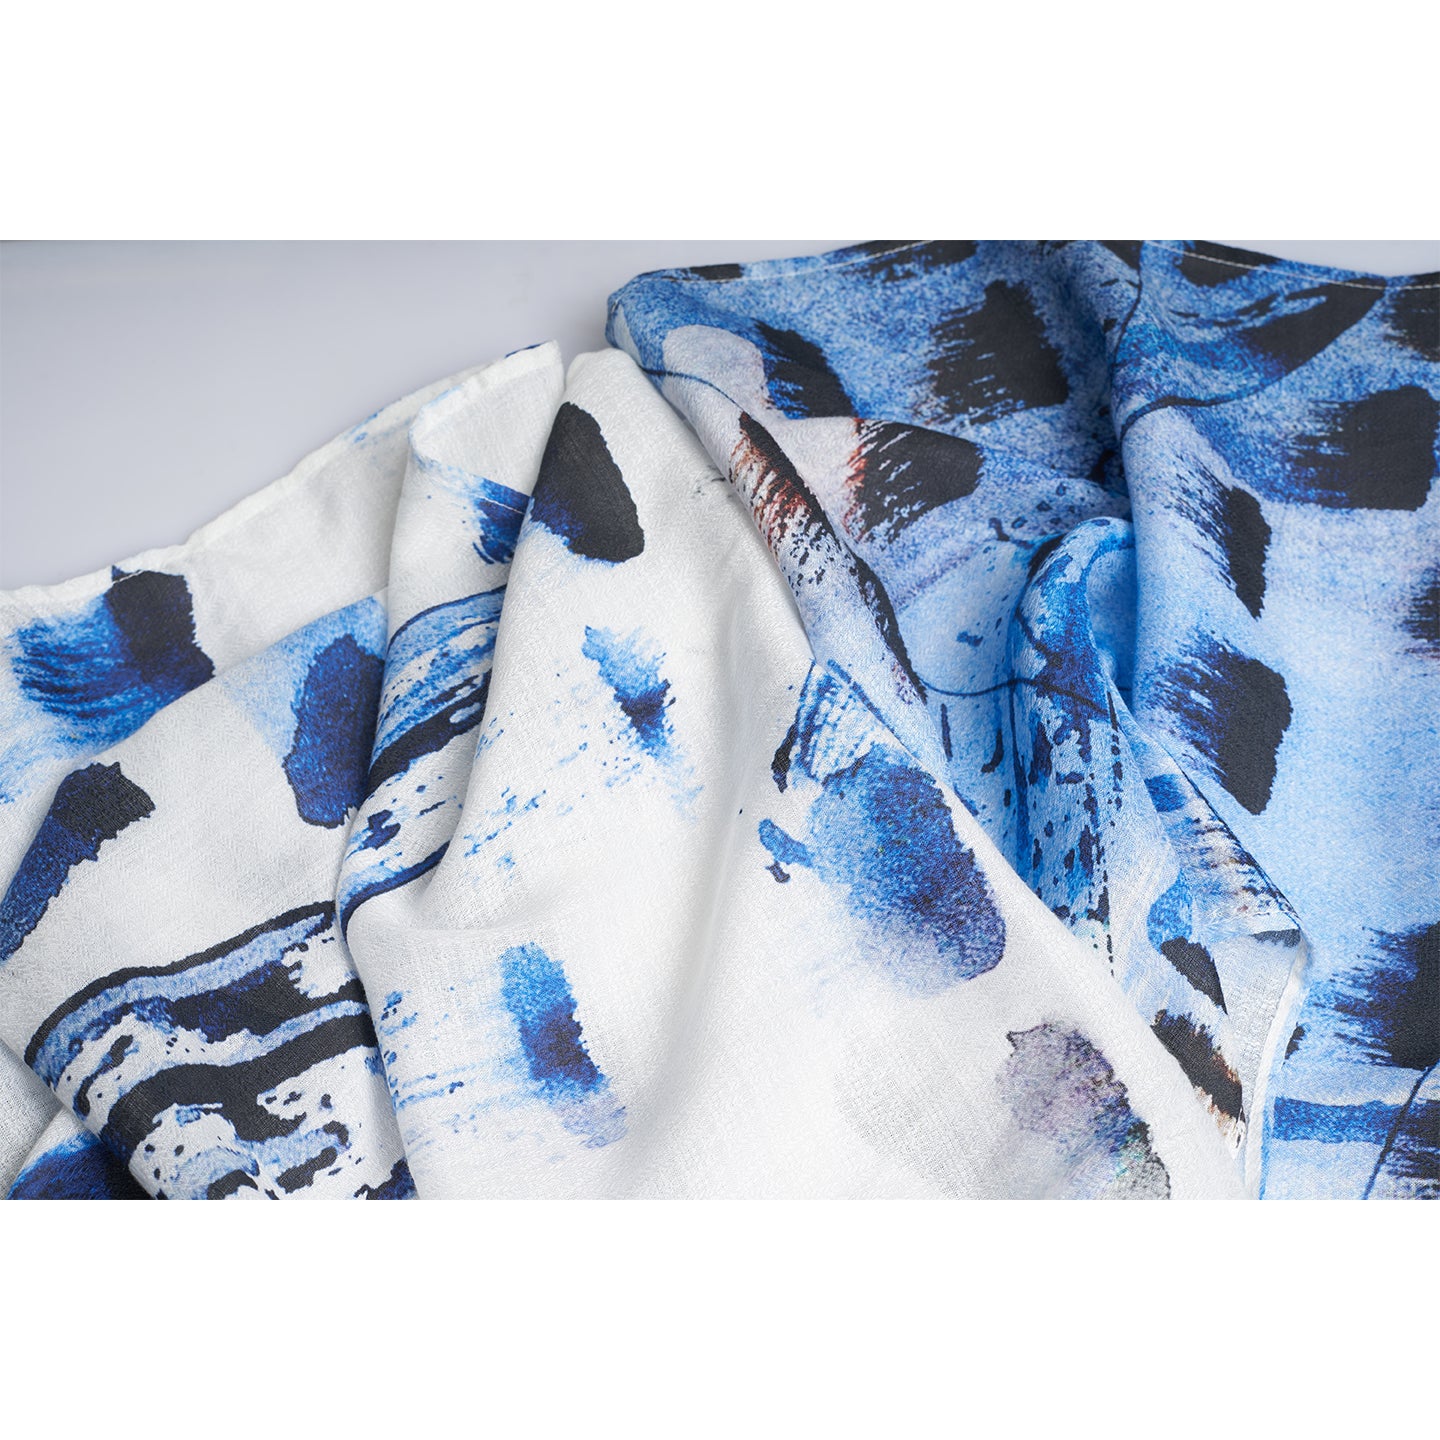 A RECTANGLE UNISEX THIN SCARF made from organic rose petal fabric. The scarf is printed with non toxic GOTS certified inks. the print is inspired from paint brush stokes and leaves in blue navy black and white.